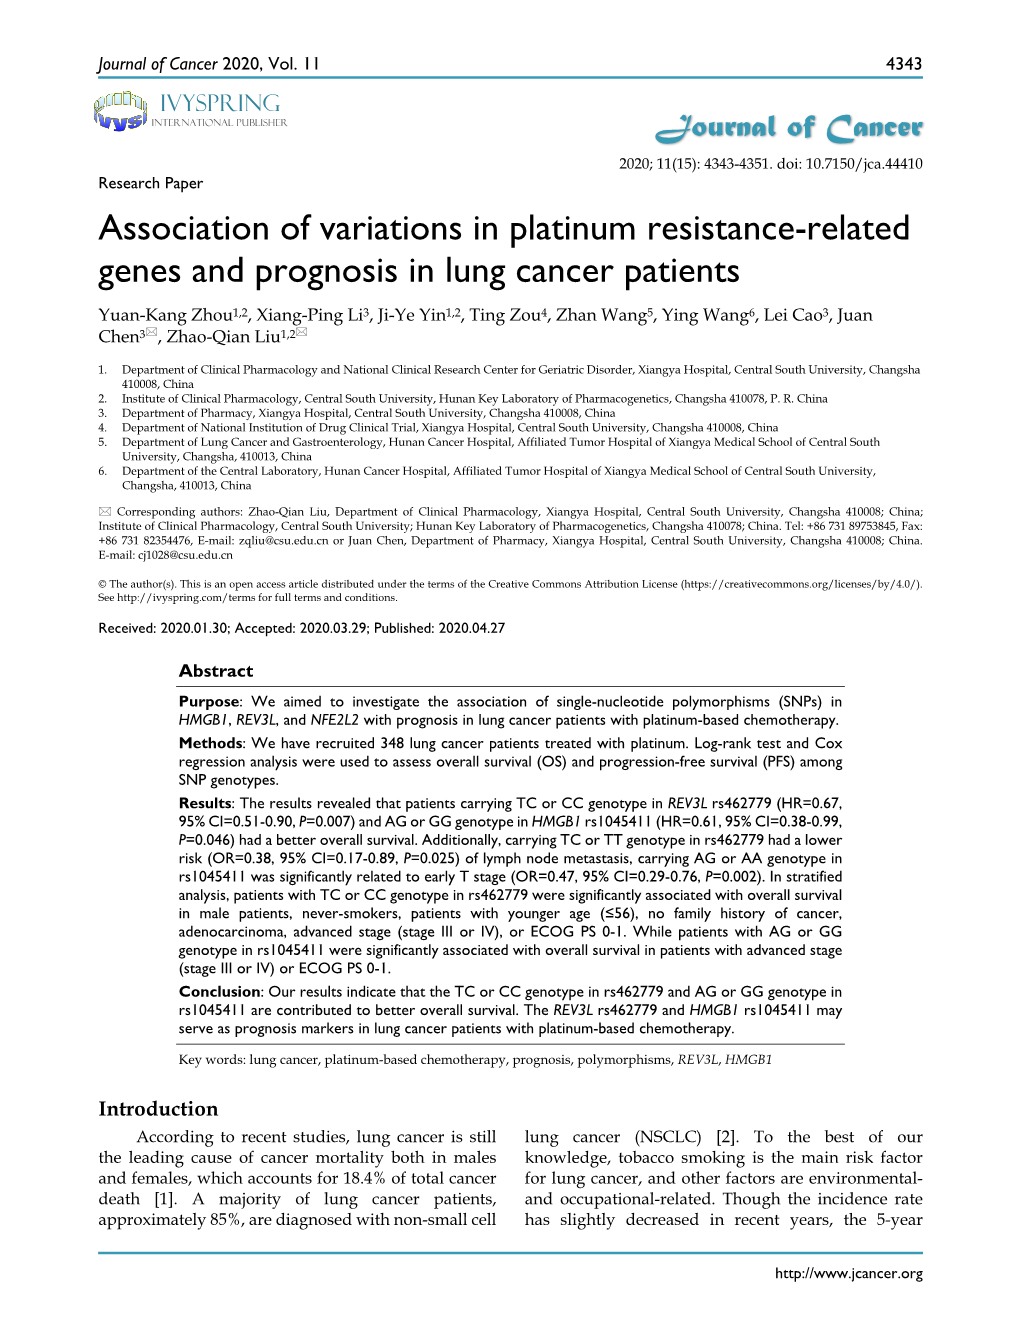 Association of Variations in Platinum Resistance-Related Genes And